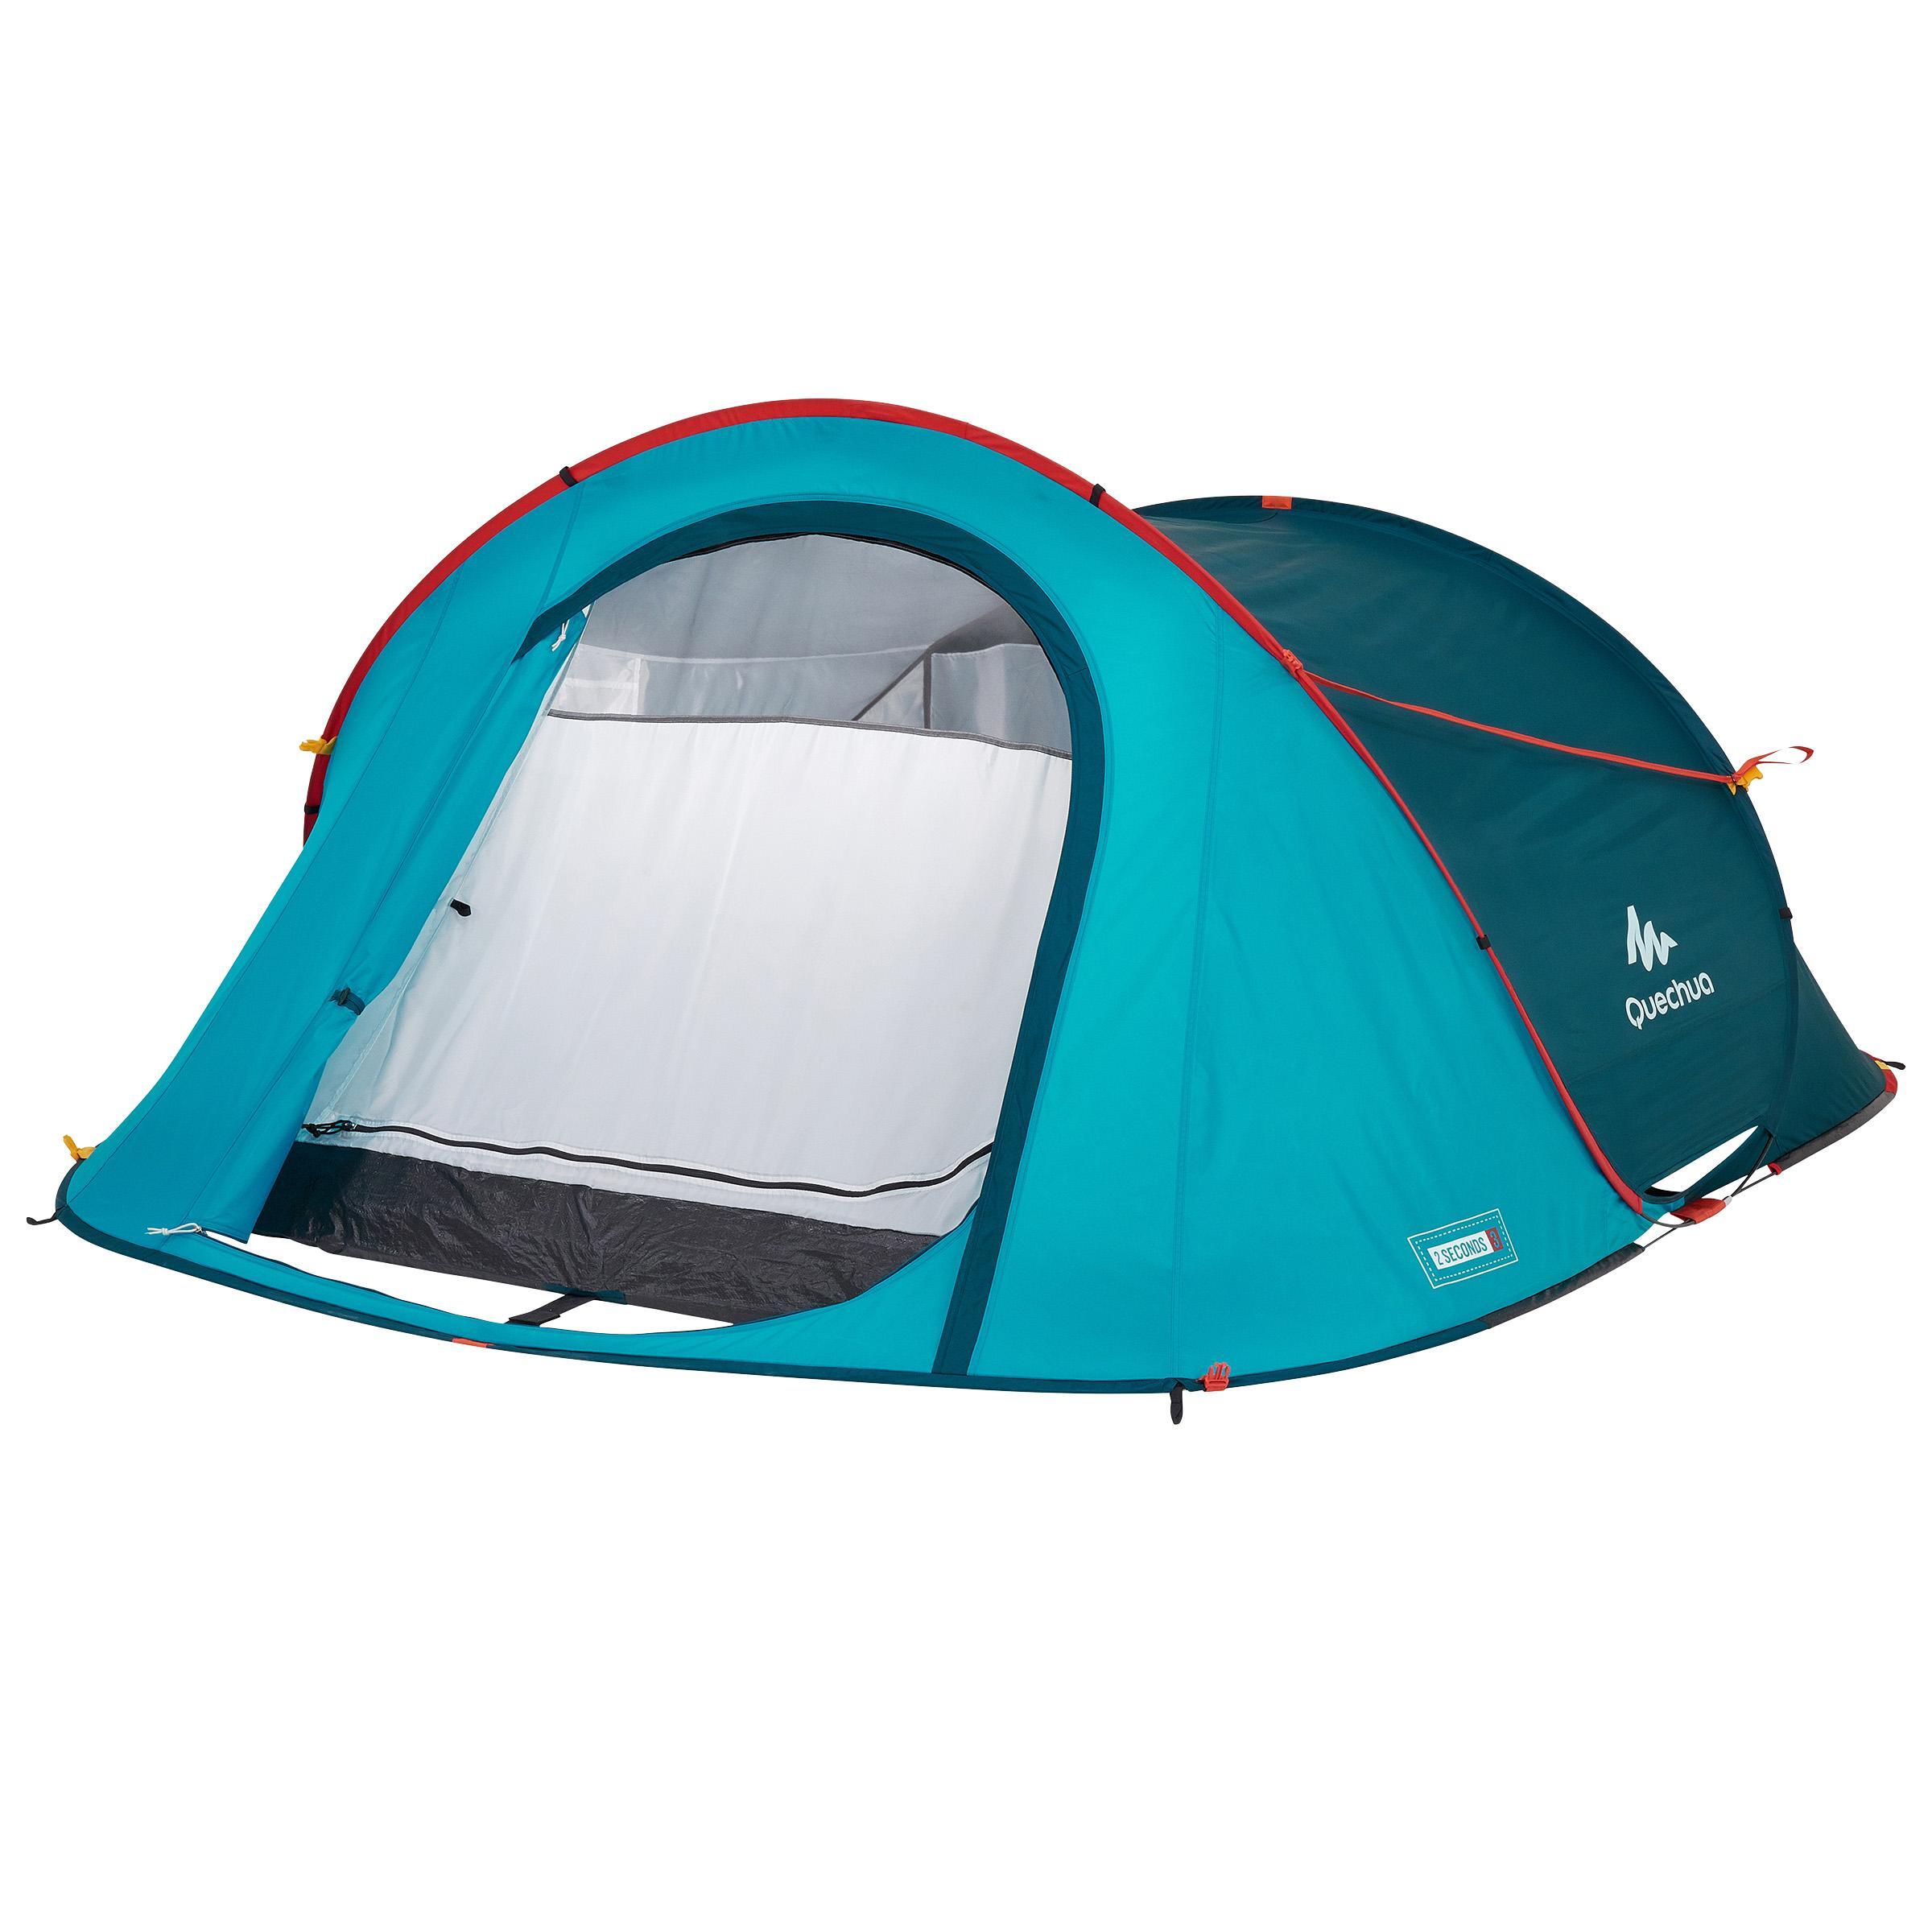 Camping tent - 2 SECONDS - 3-person 14/26